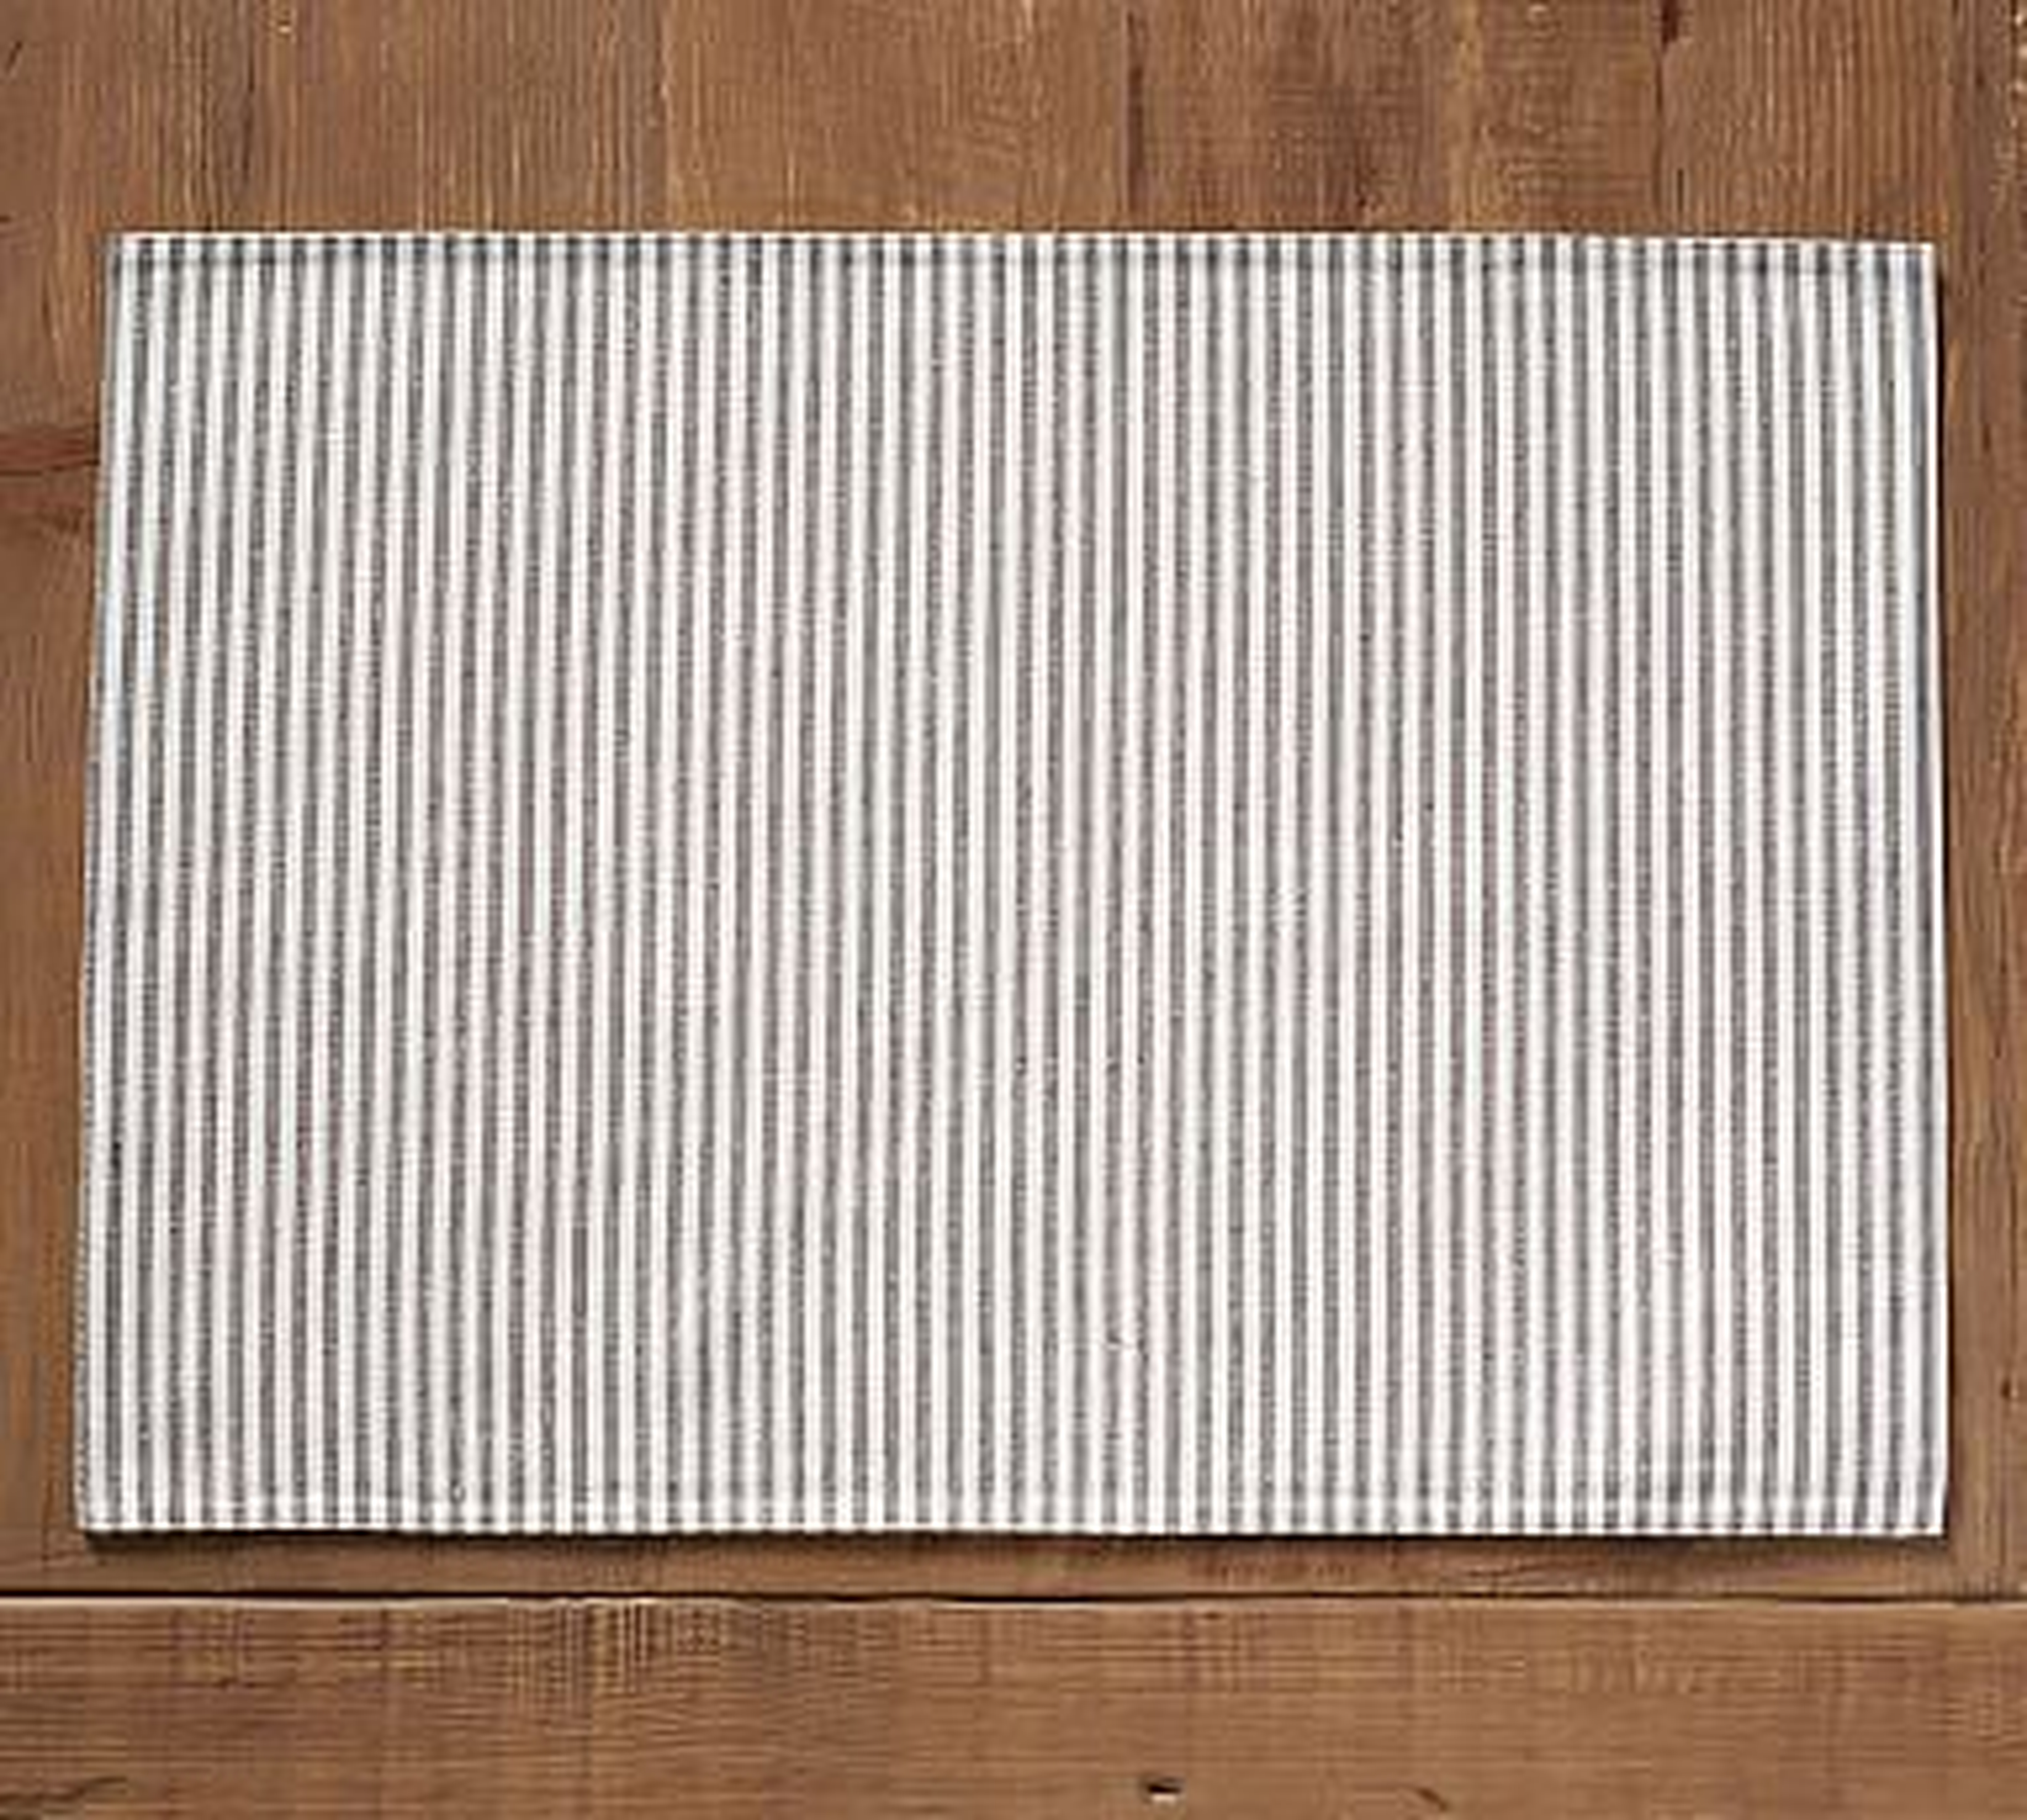 Wheaton Striped Linen/Cotton Placemats, Set of 4 - Charcoal - Pottery Barn